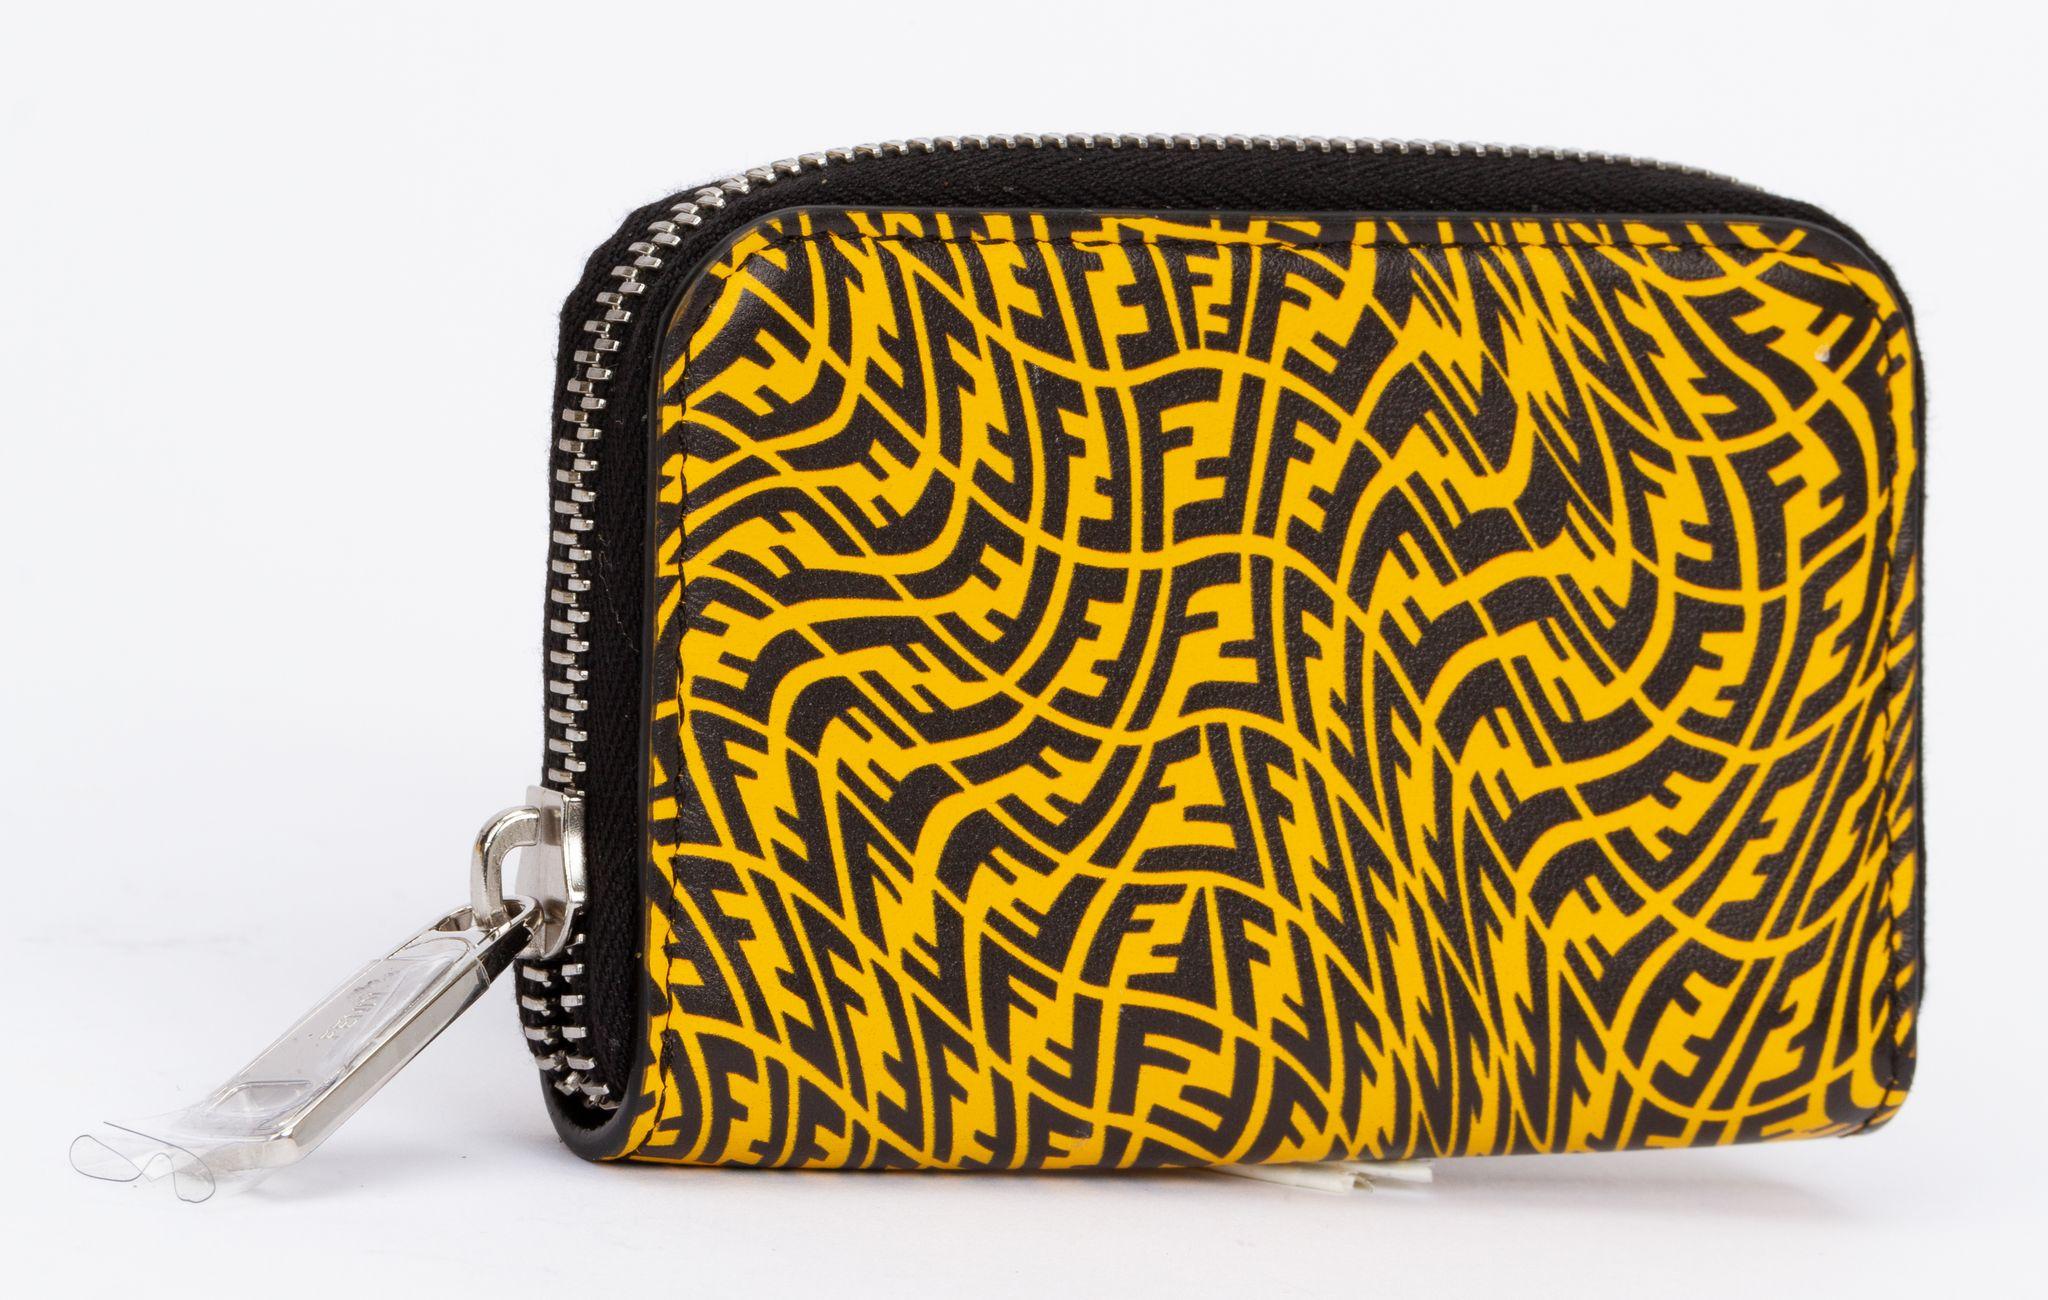 Fendi wallet made of leather in a bright yellow. The vertigo print is made of many F logos which are swirled around. The inside is black and has some card holders as well as an department for money. The piece is new and comes with a tag, original